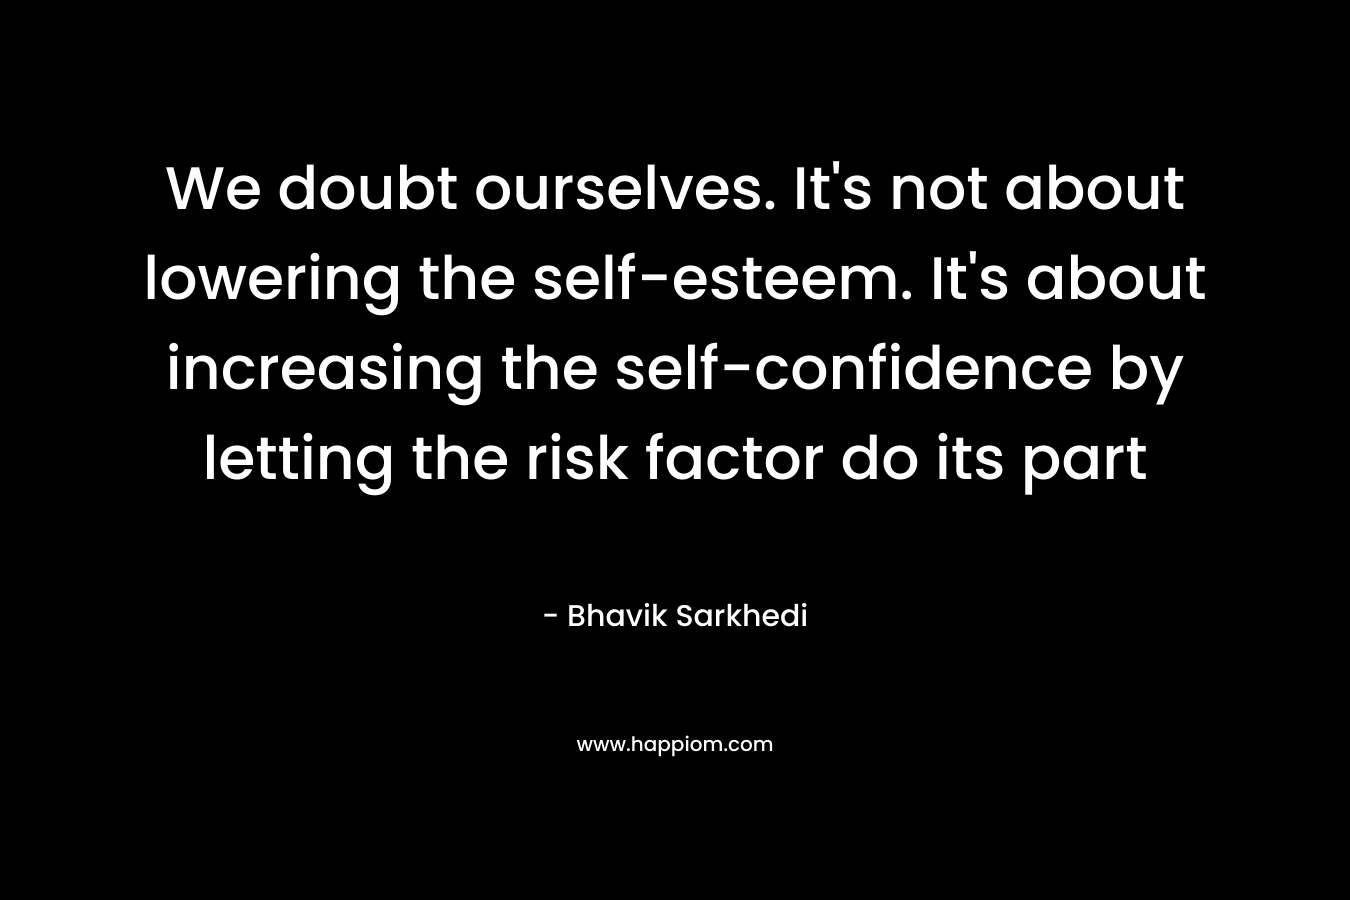 We doubt ourselves. It's not about lowering the self-esteem. It's about increasing the self-confidence by letting the risk factor do its part